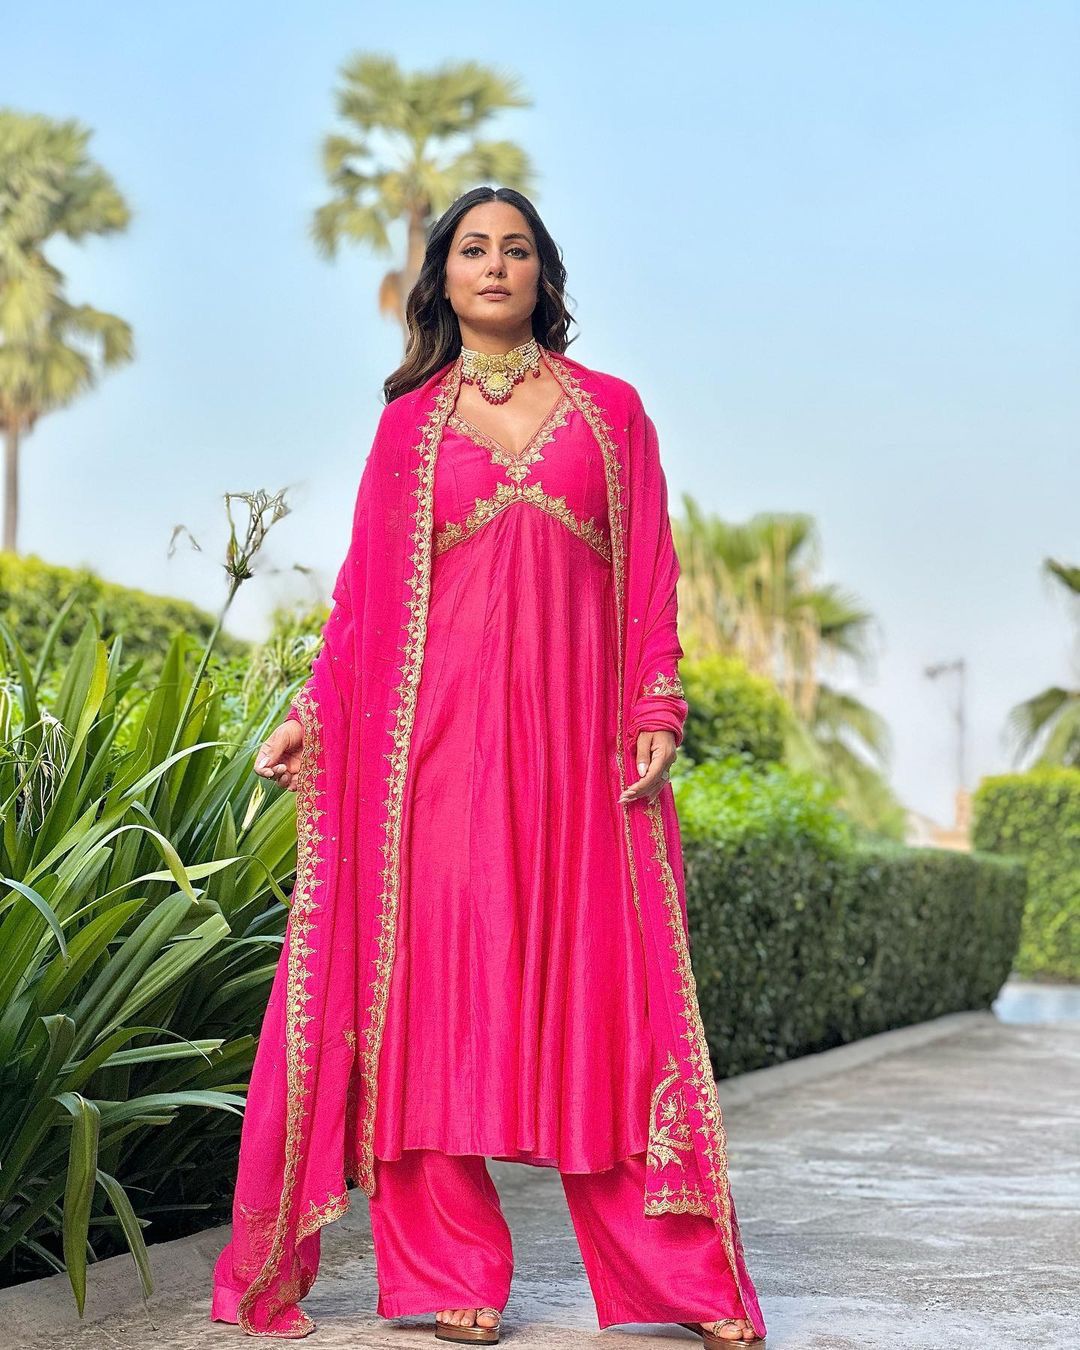 Hina Khan Wear Function Wear Pink Color Gown